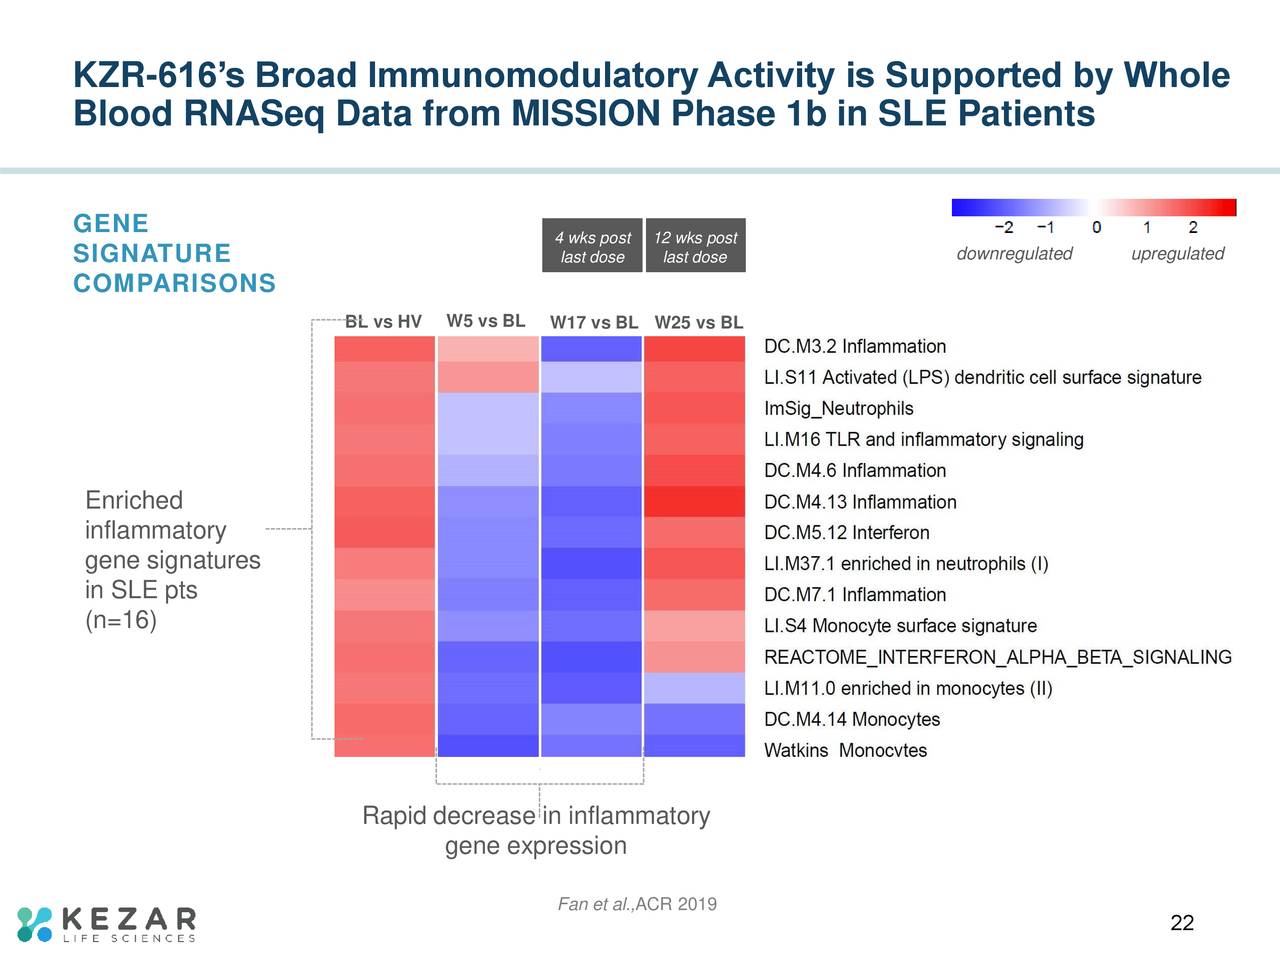 KZR-616’s Broad Immunomodulatory Activity is Supported by Whole